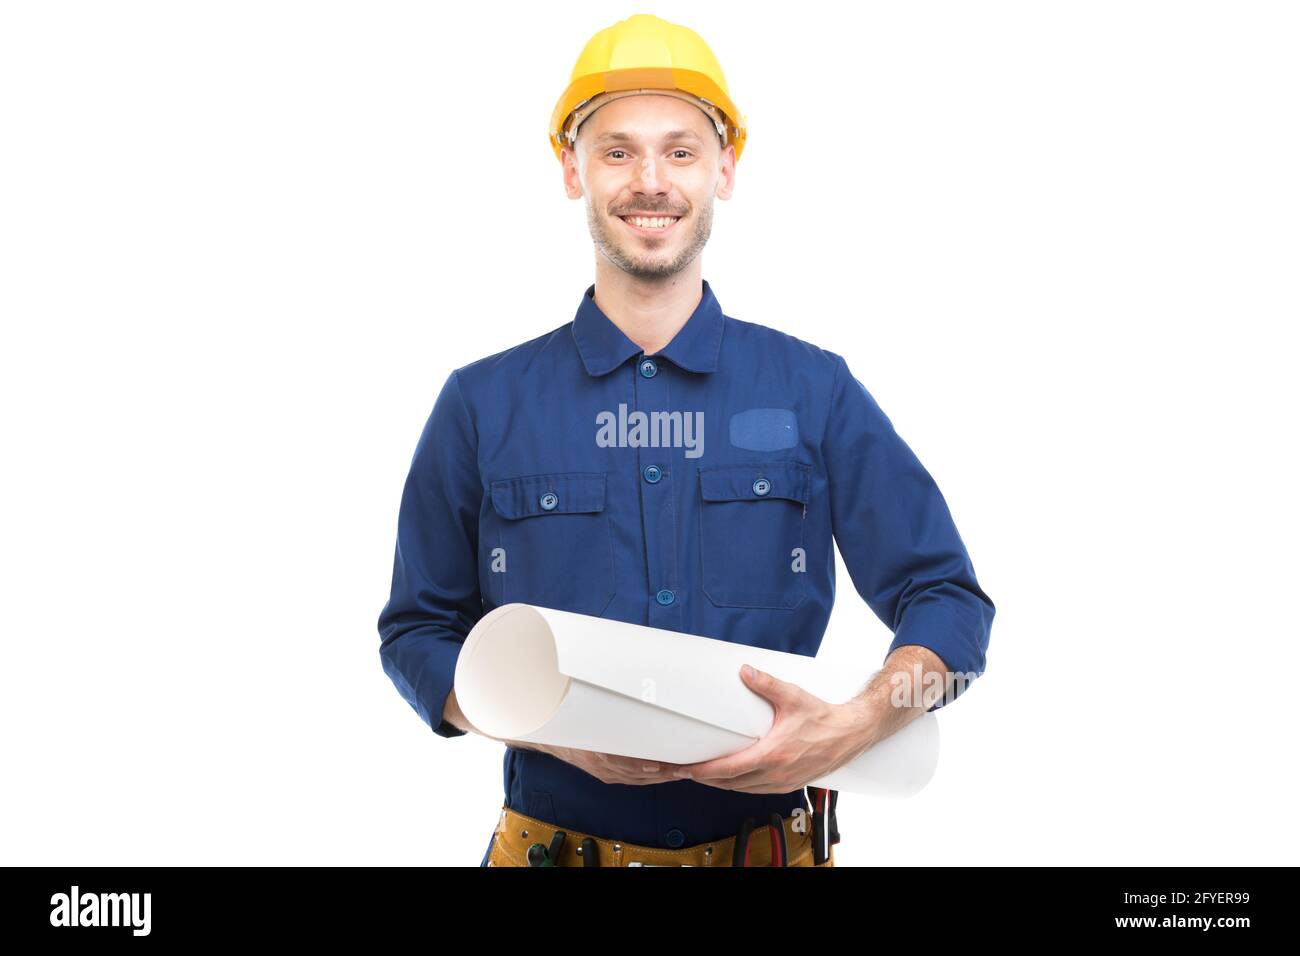 Horizontal medium portrait of modern handsome young adult Caucasian engineer wearing blue uniform holding construction plan, white background Stock Photo